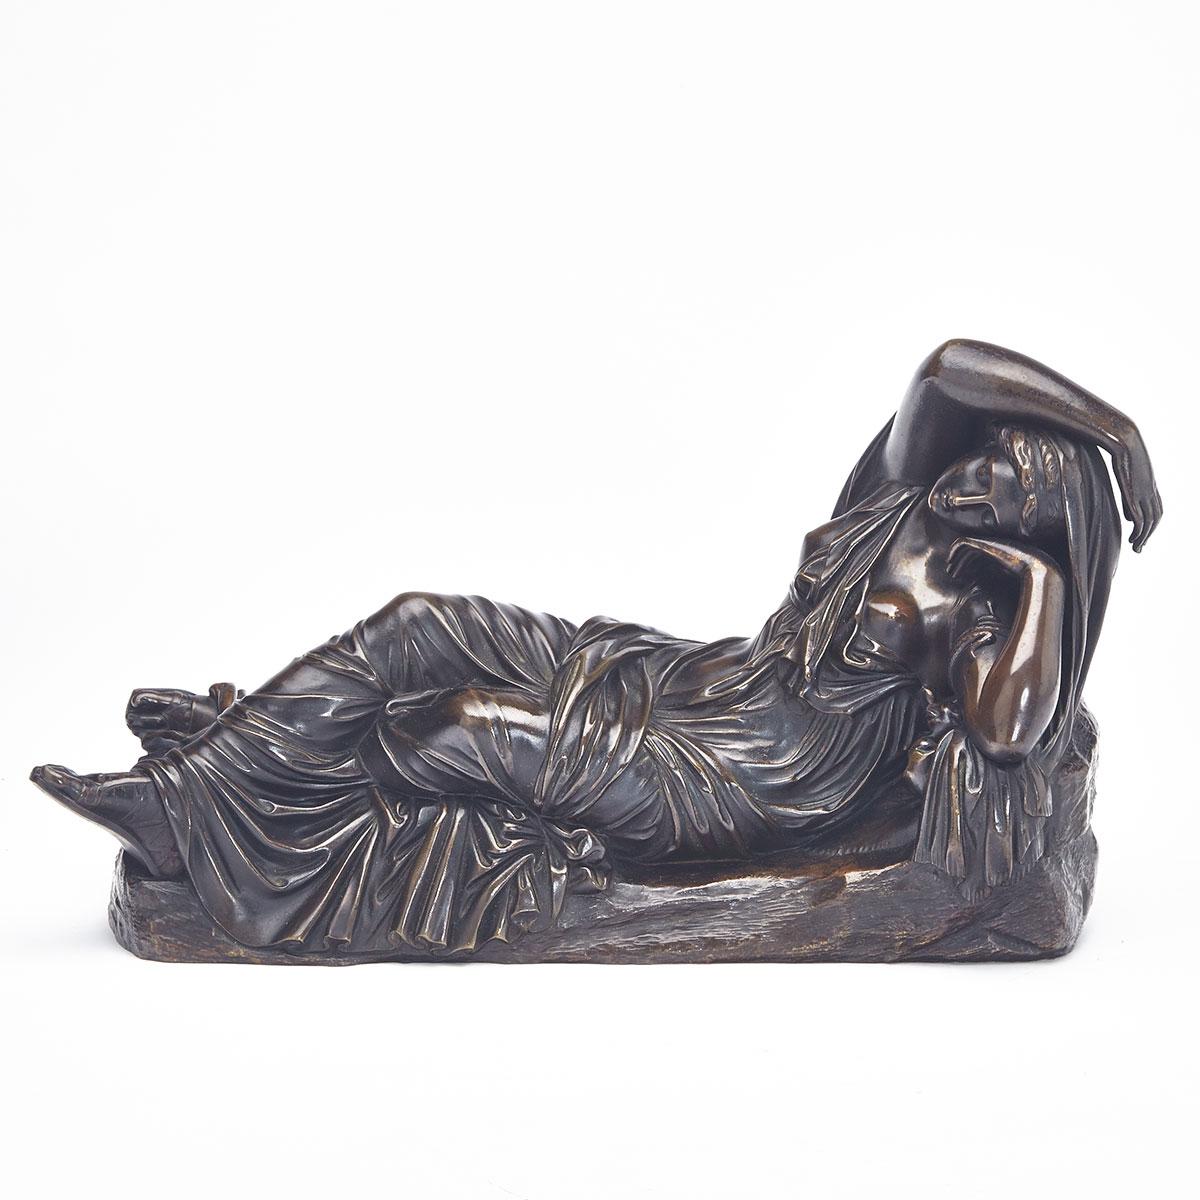 French Patinated Bronze Figure of the Sleeping Ariadne, After the Antique, 19th century